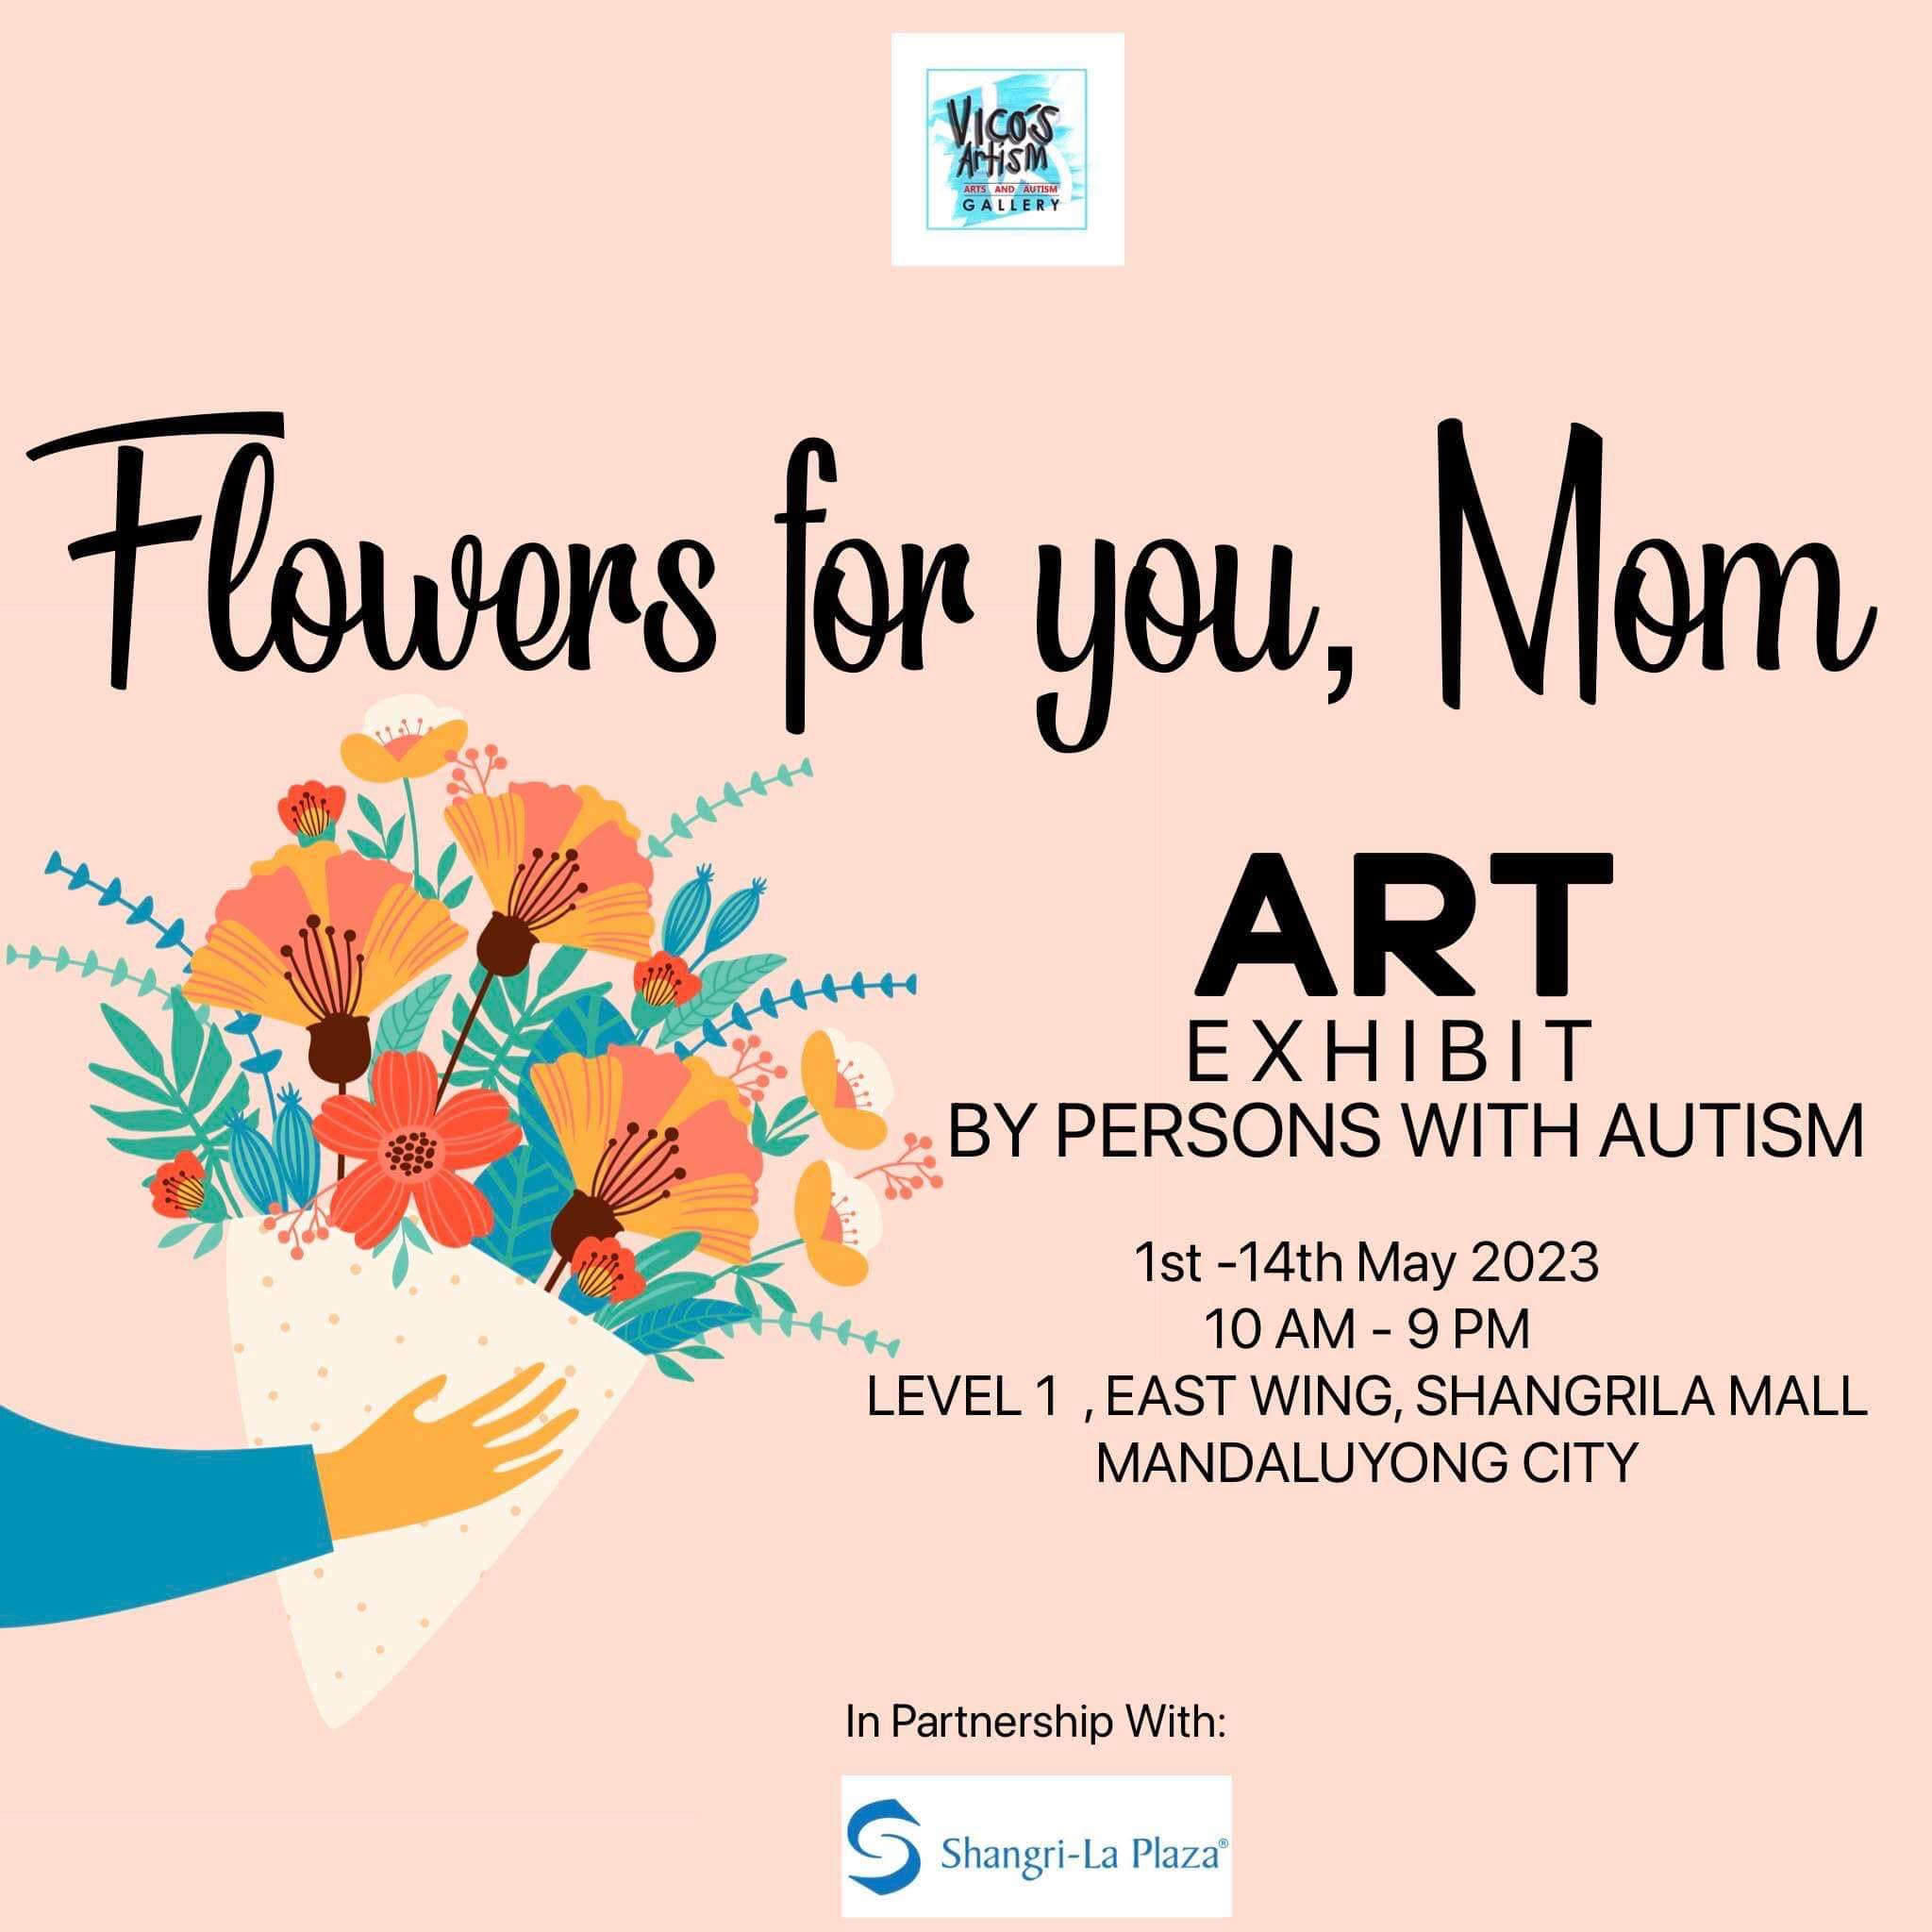 Things to do May 2023 - Flowers for you, Mom an Art Exhibit by persons with autism by Vico's Artism Gallery